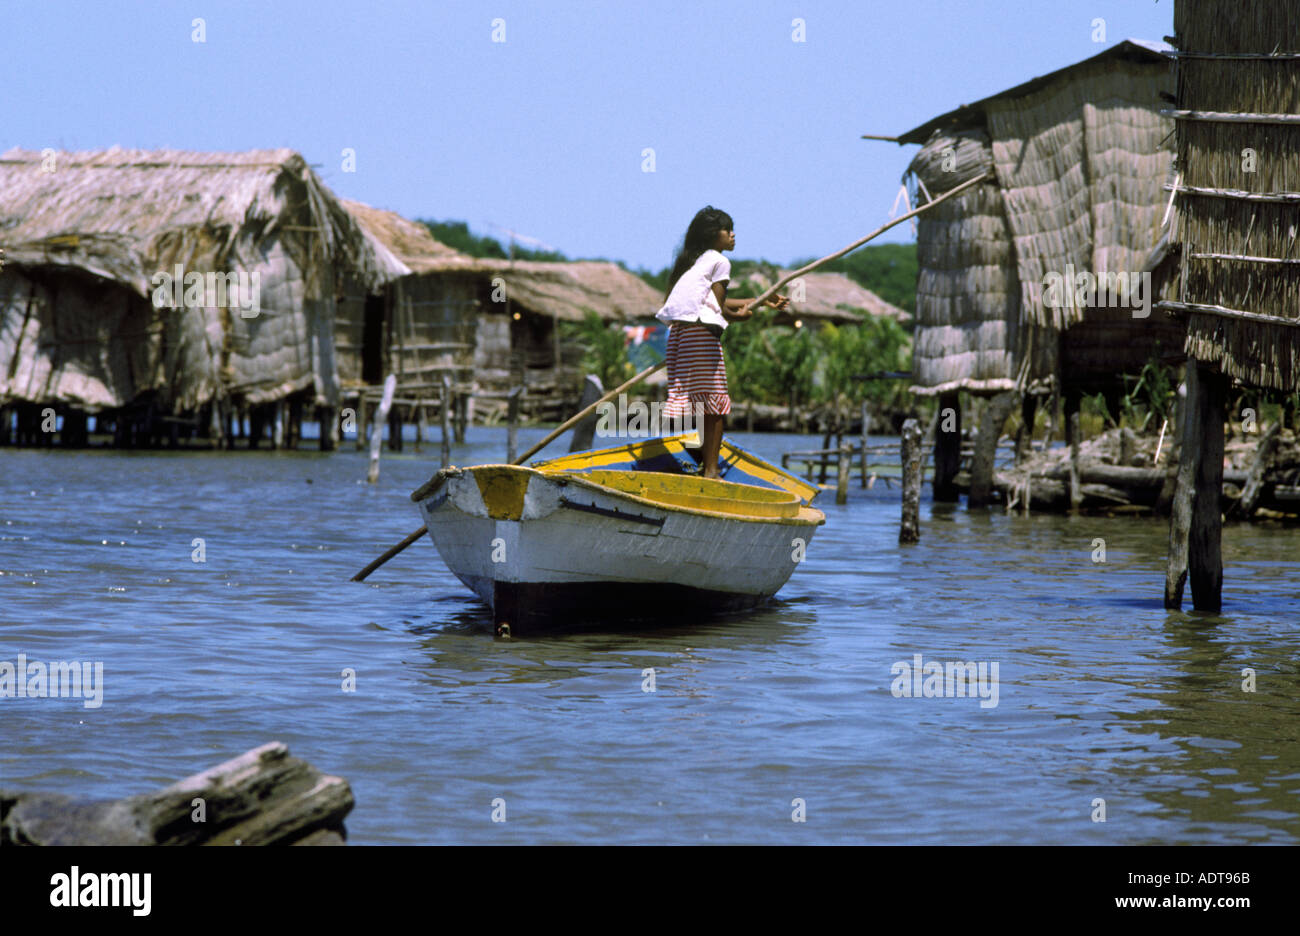 A young girl poles a boat to move between houses on stilts in Lake Maracaibo Venezuela  Stock Photo